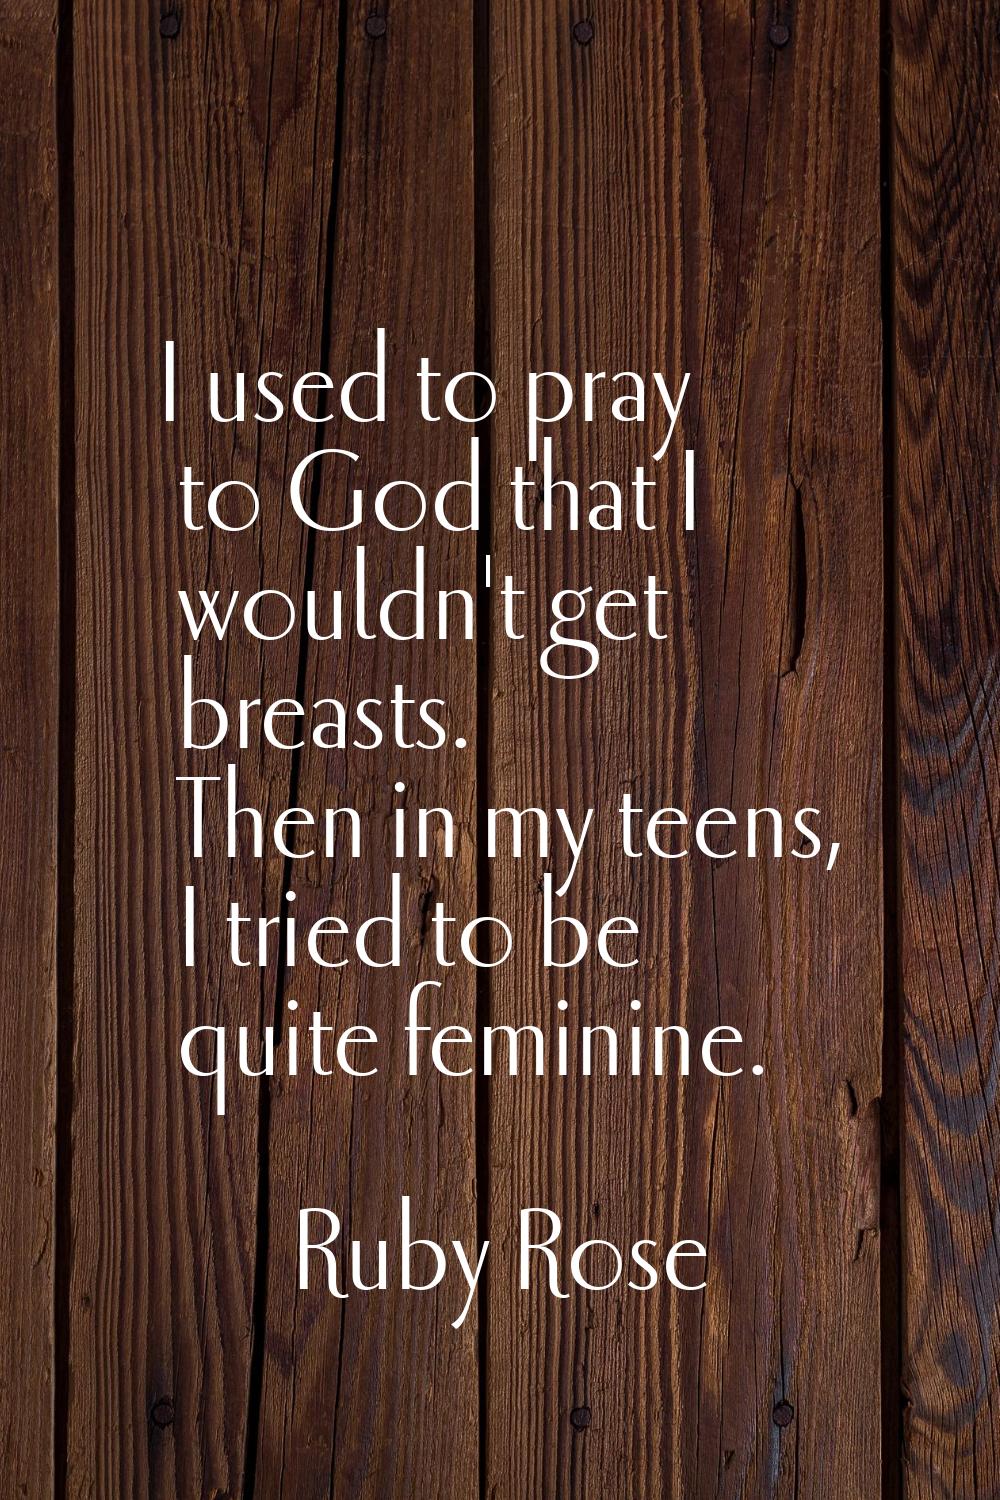 I used to pray to God that I wouldn't get breasts. Then in my teens, I tried to be quite feminine.